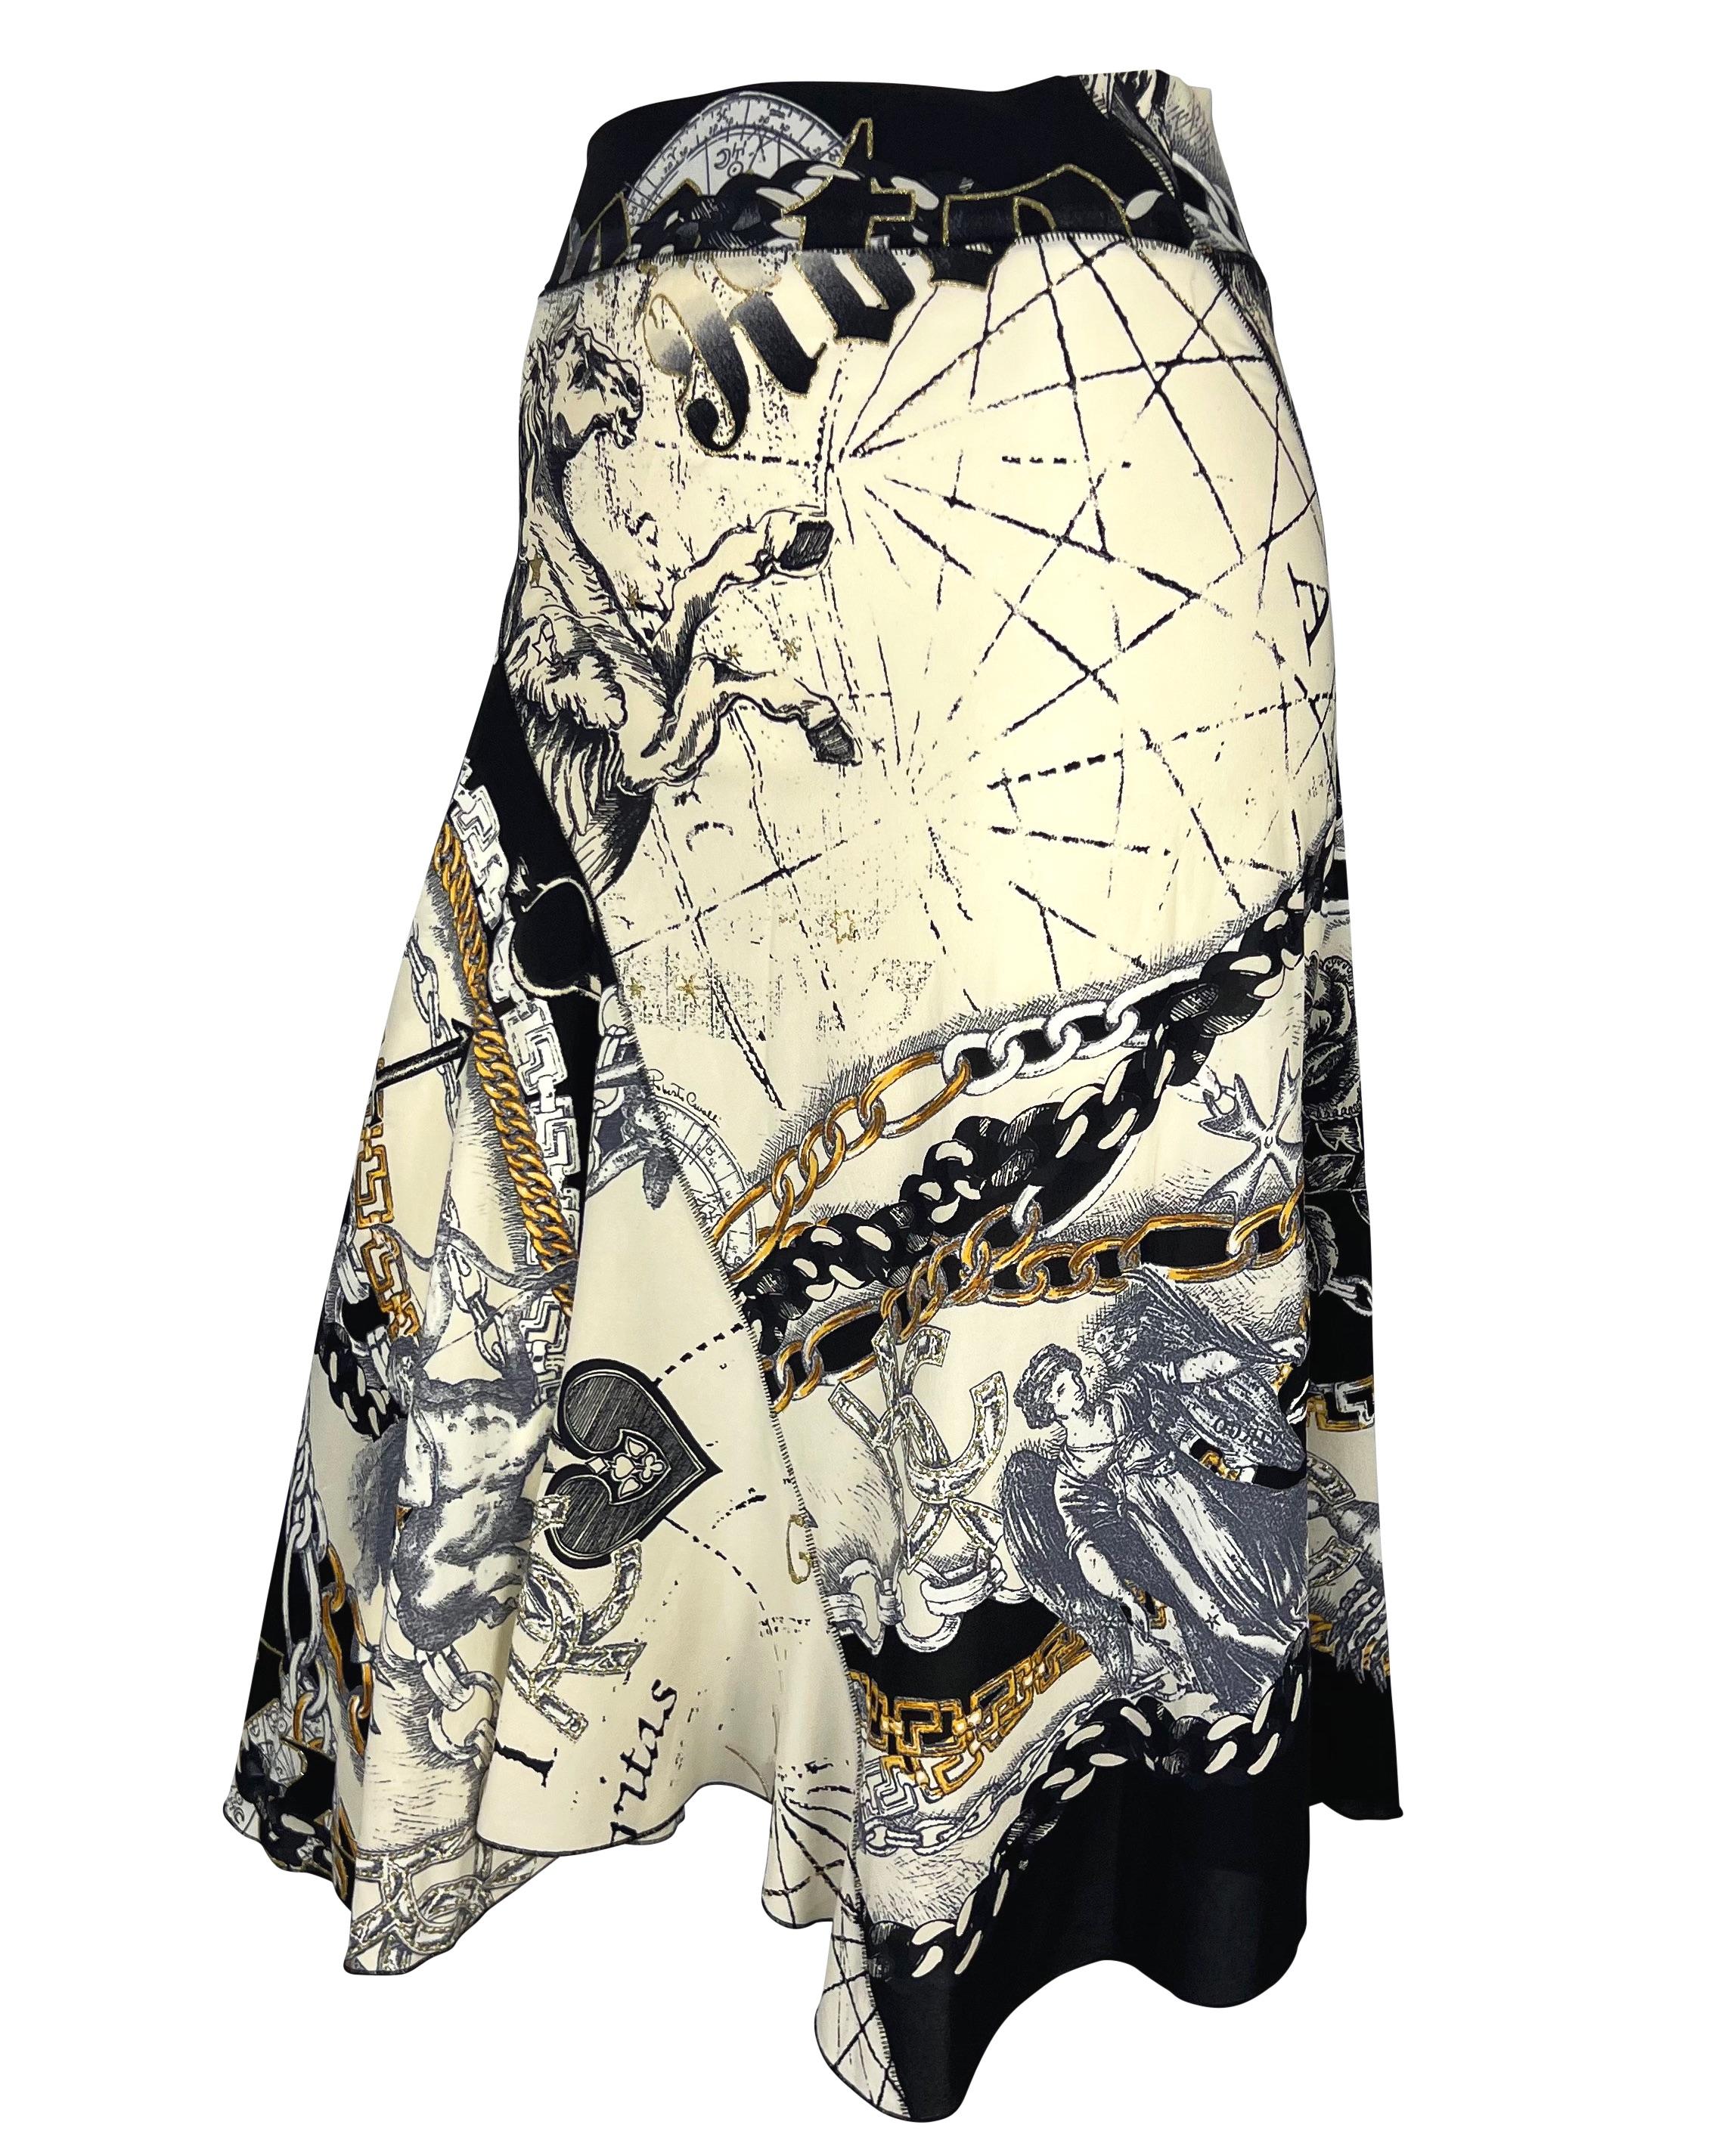 TheRealList presents: an incredible horoscope print Roberto Cavalli handkerchief flare skirt. From 2003, this sought-after print features constellations and depicts some of the horoscope signs. 

Follow us on Instagram! @_the_reallist_

Approximate